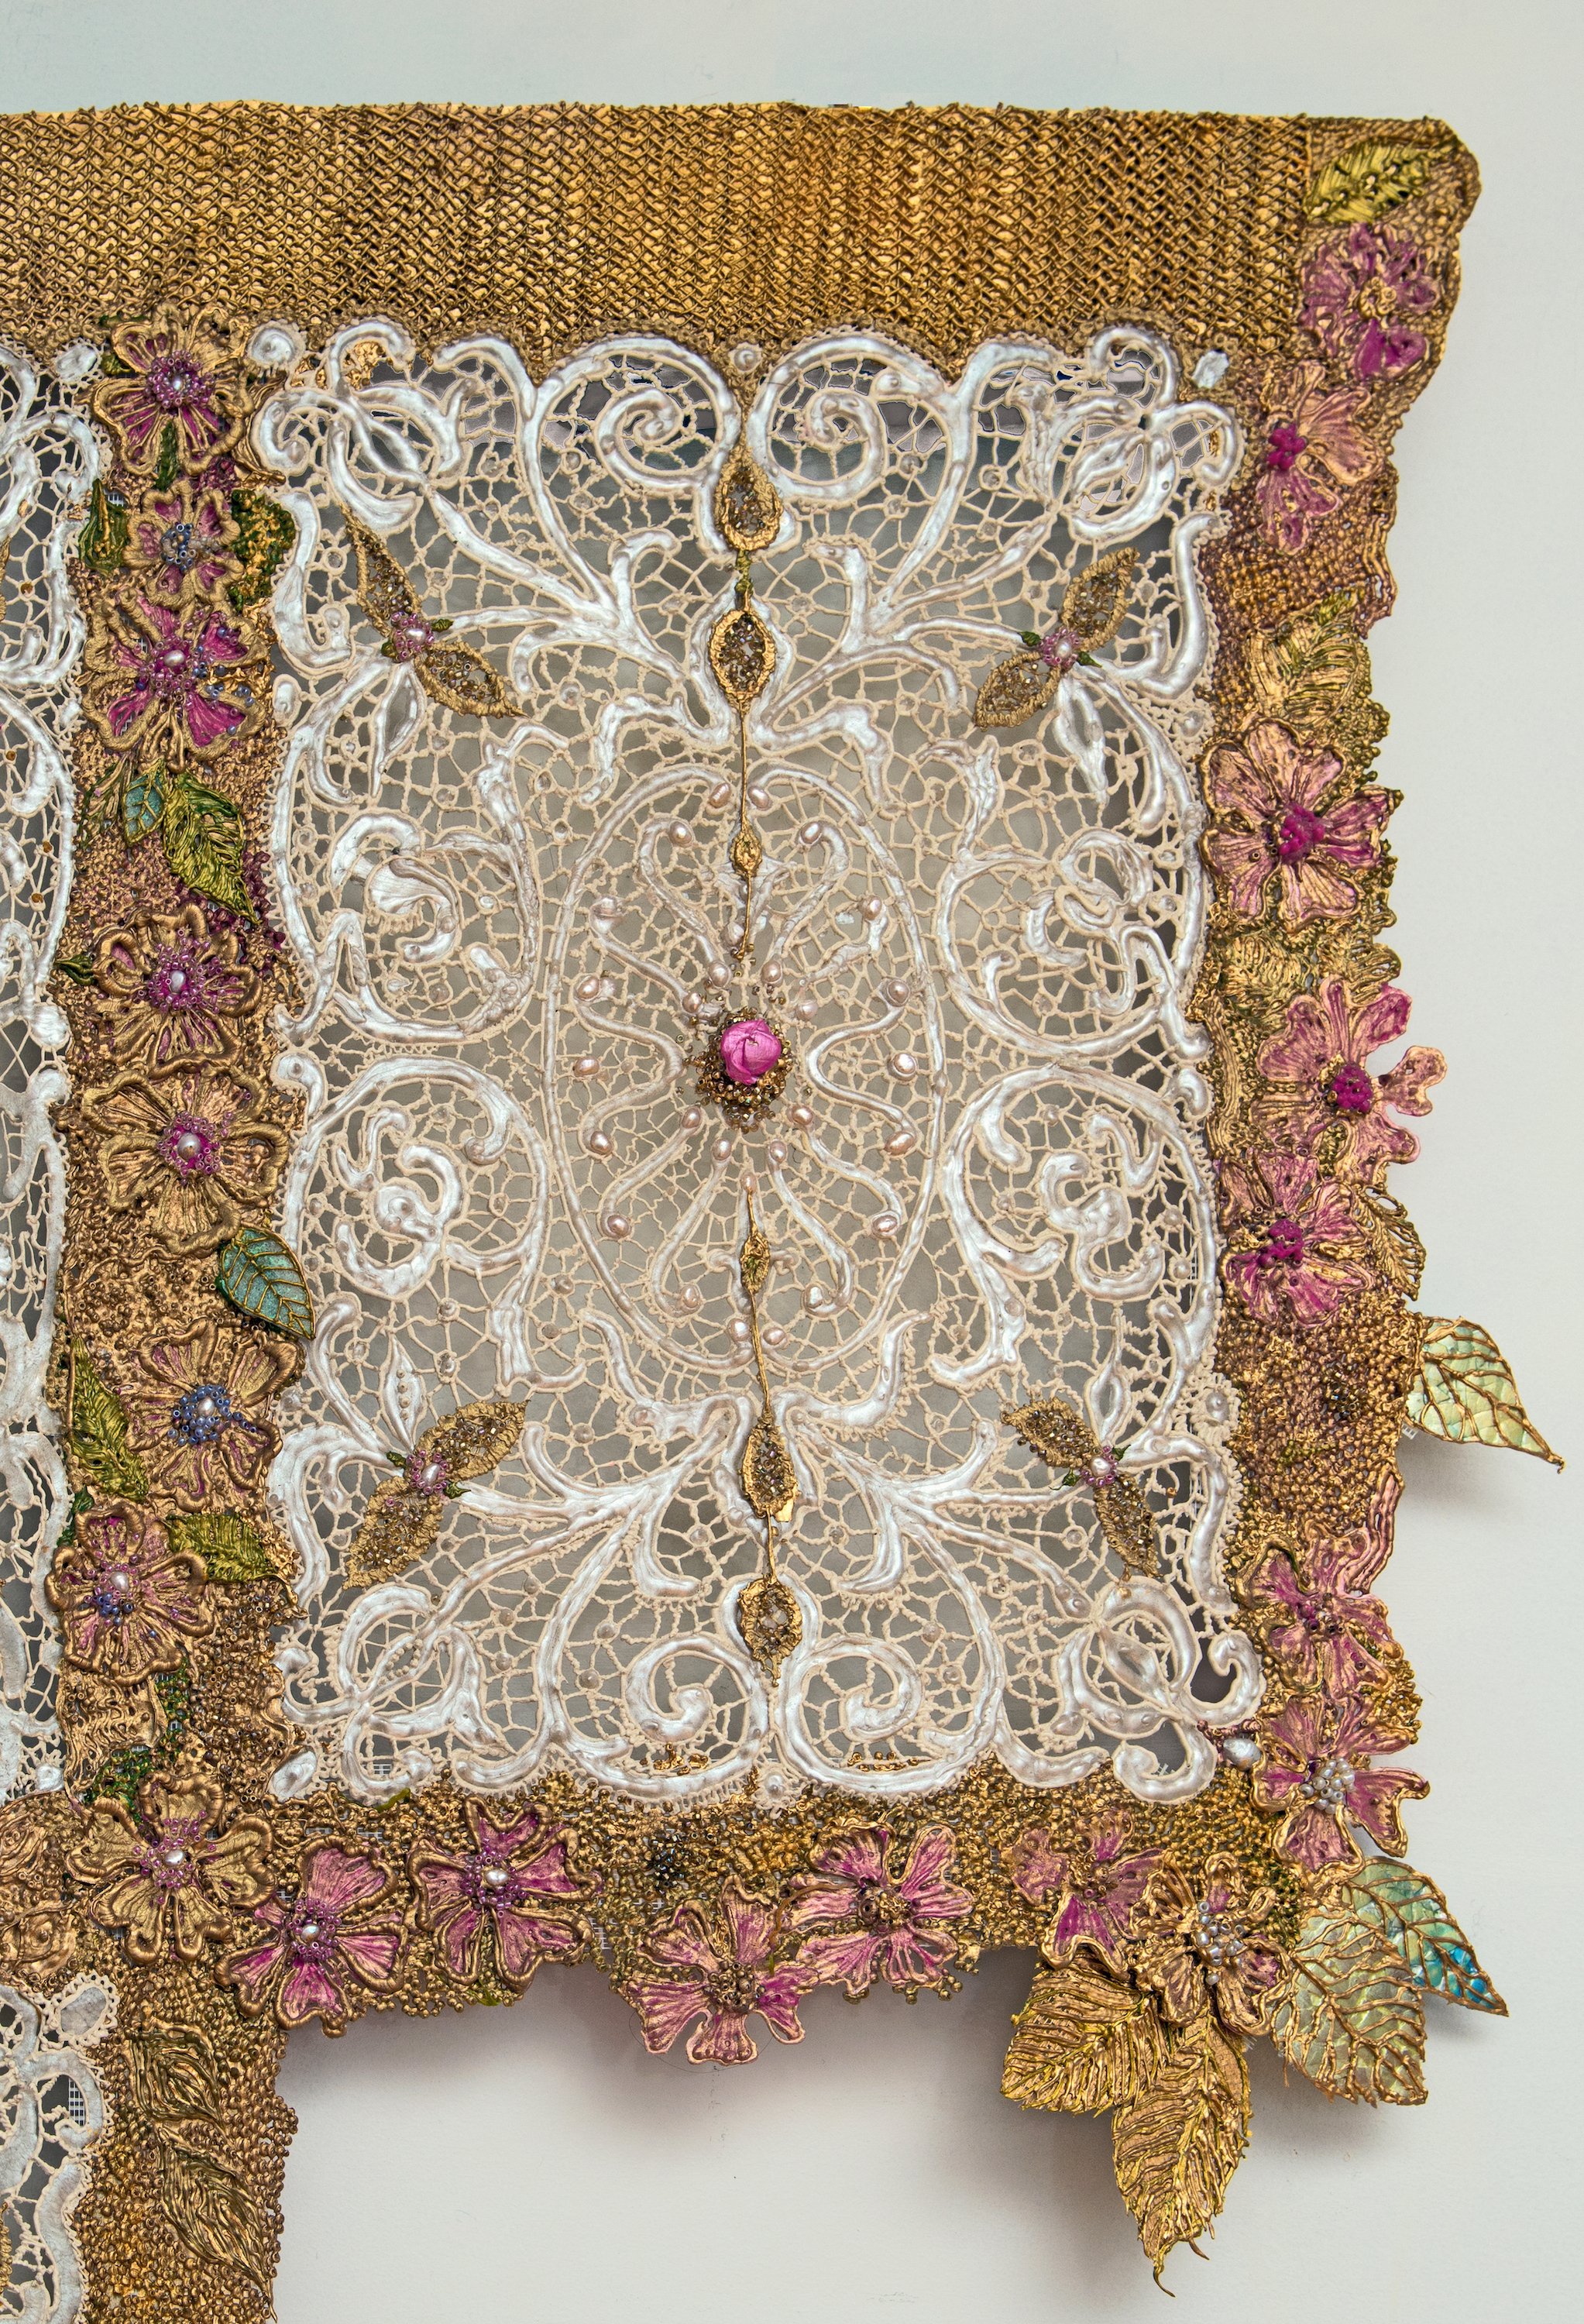 Pat Lasch: # The Legend of Pope Joan # March 17 - April 27, 2023 &lt;alt="Detail of a garment of acrylic paint lace, flowers, and leaves in white, gold, pink, and green."&gt;